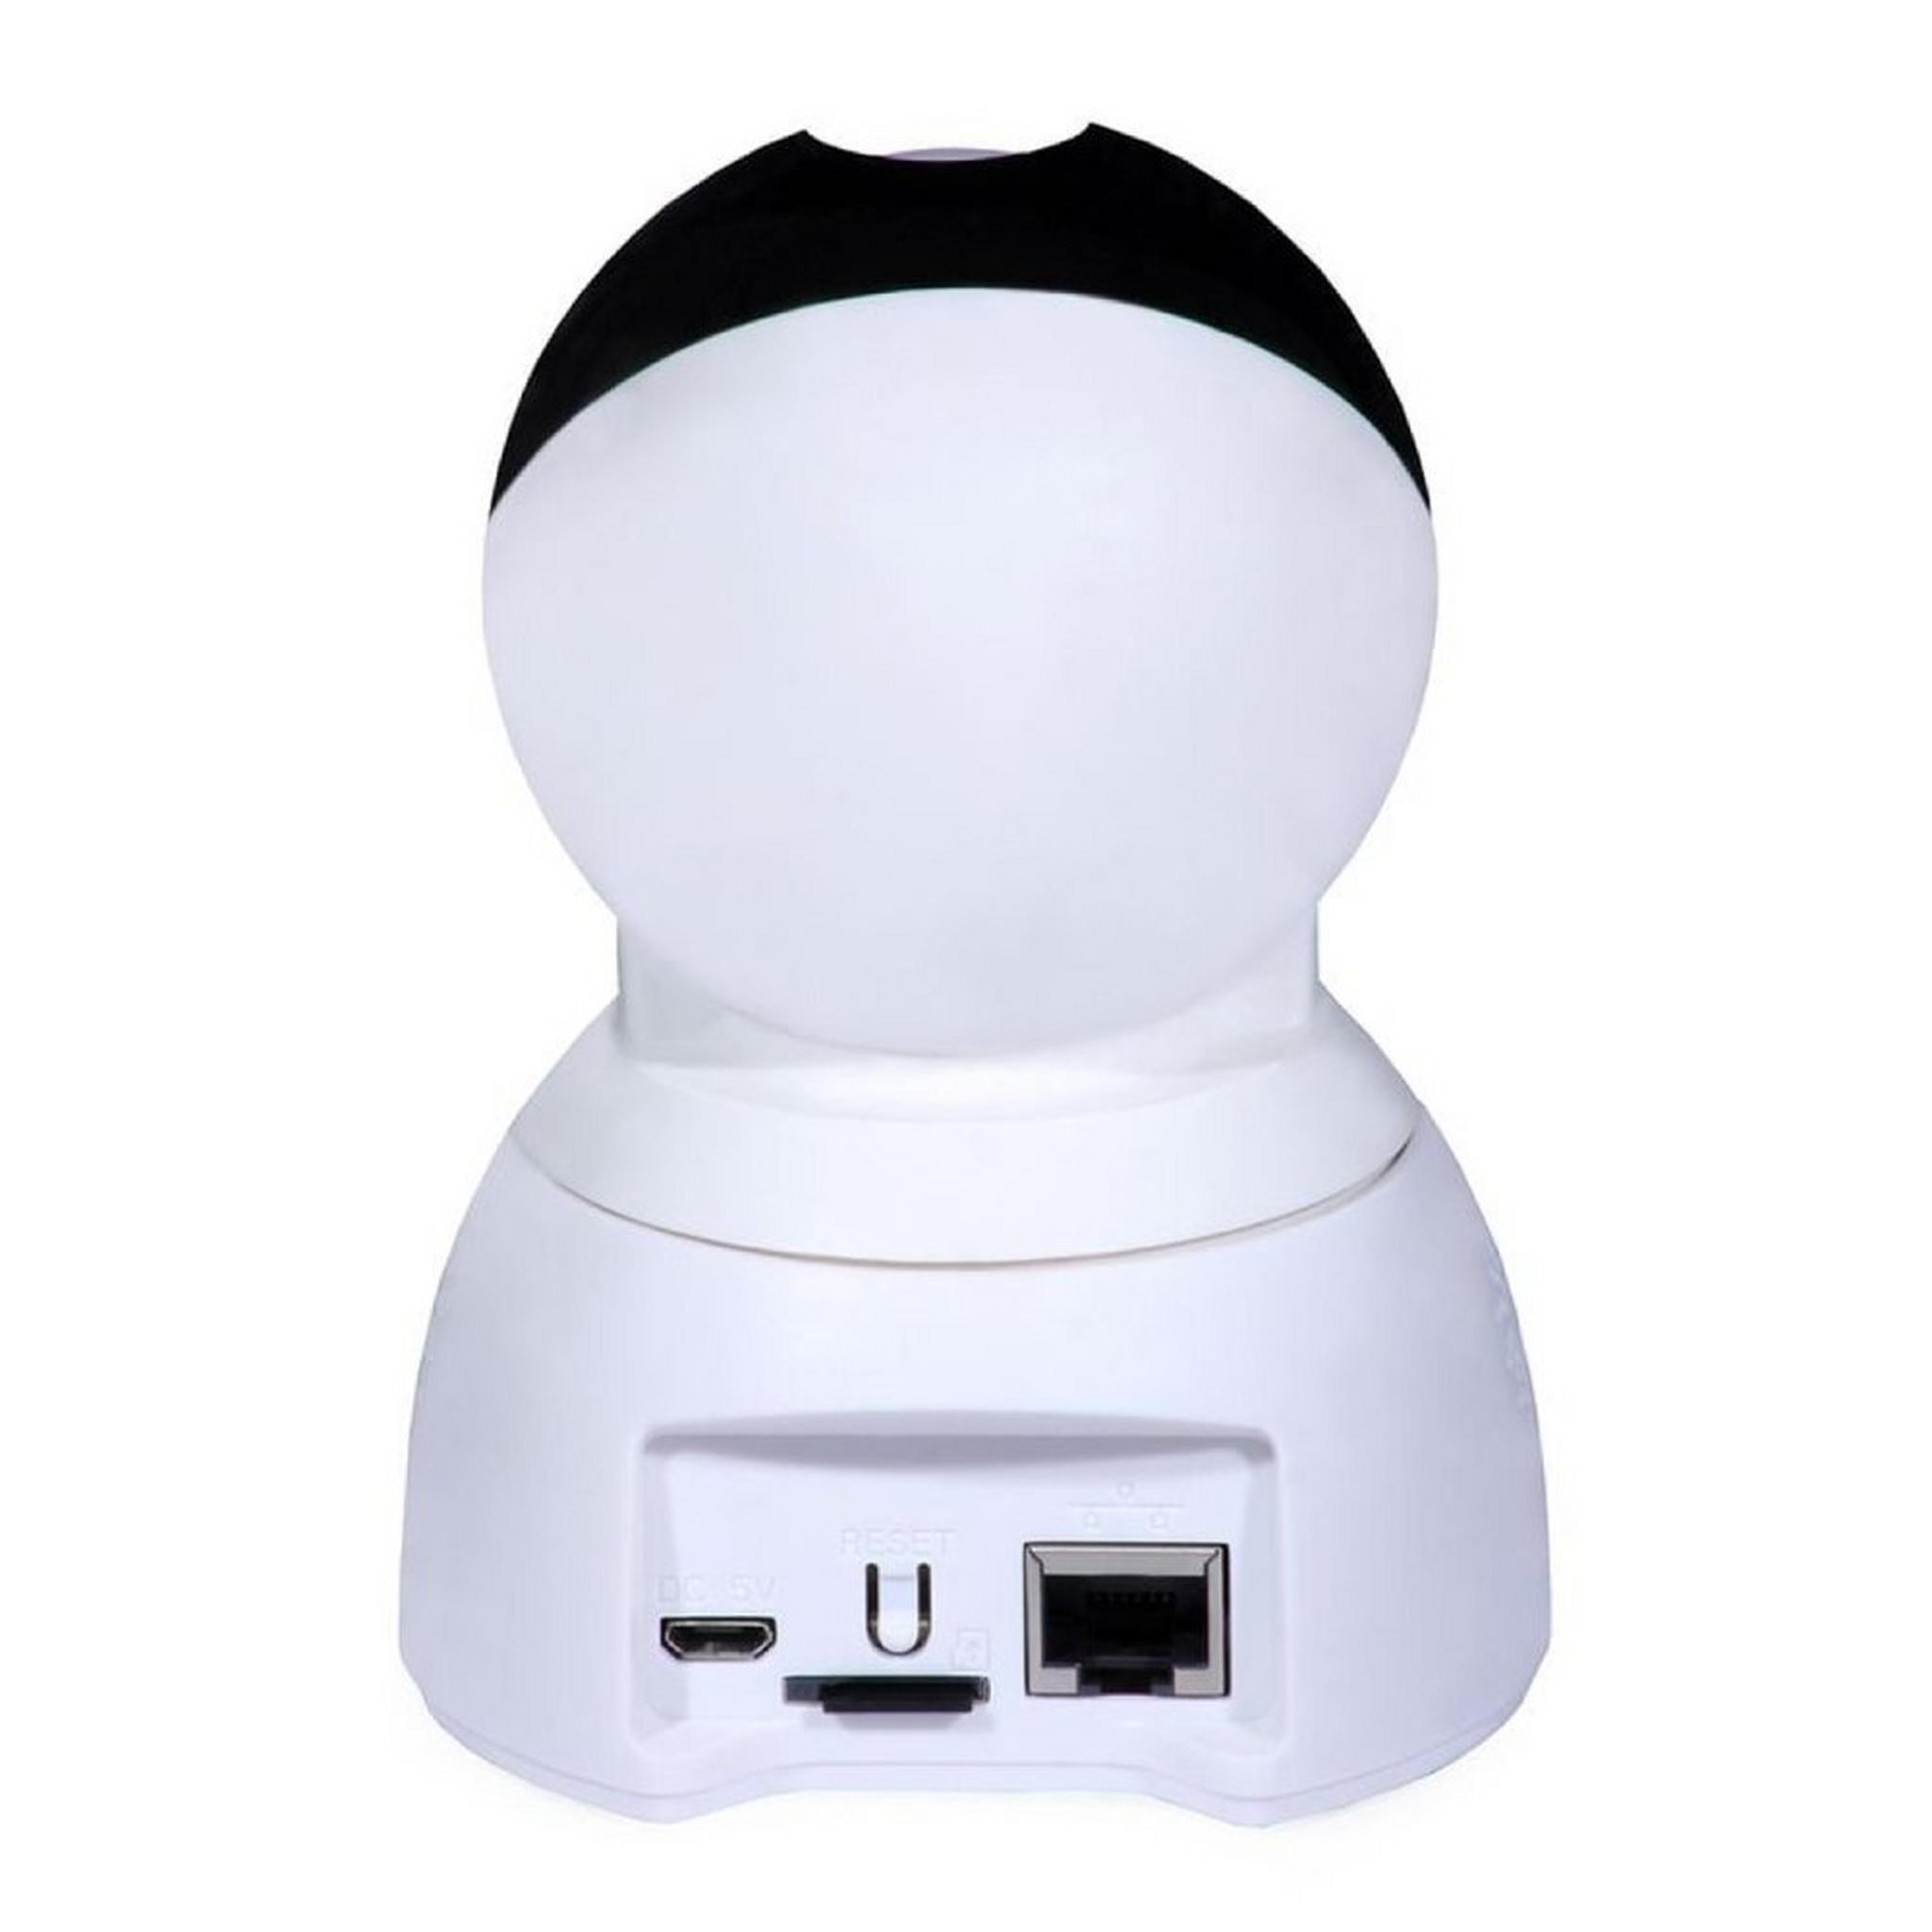 Vimtag CP3 FHD 5MP IP Security Camera